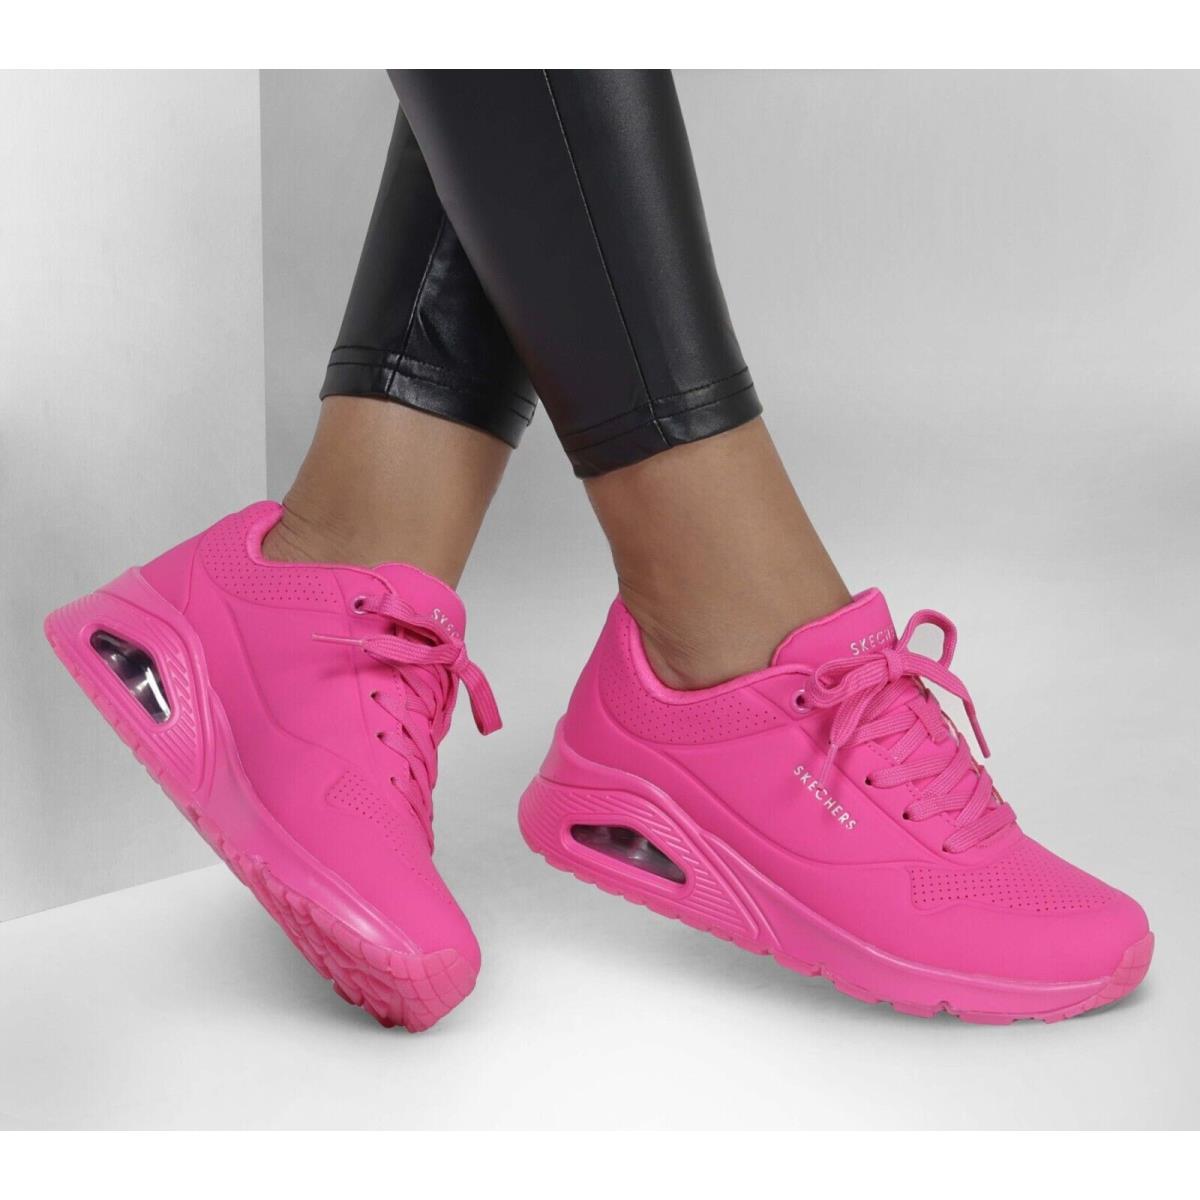 Skechers shoes Uno Night Shades - Hot Pink 0